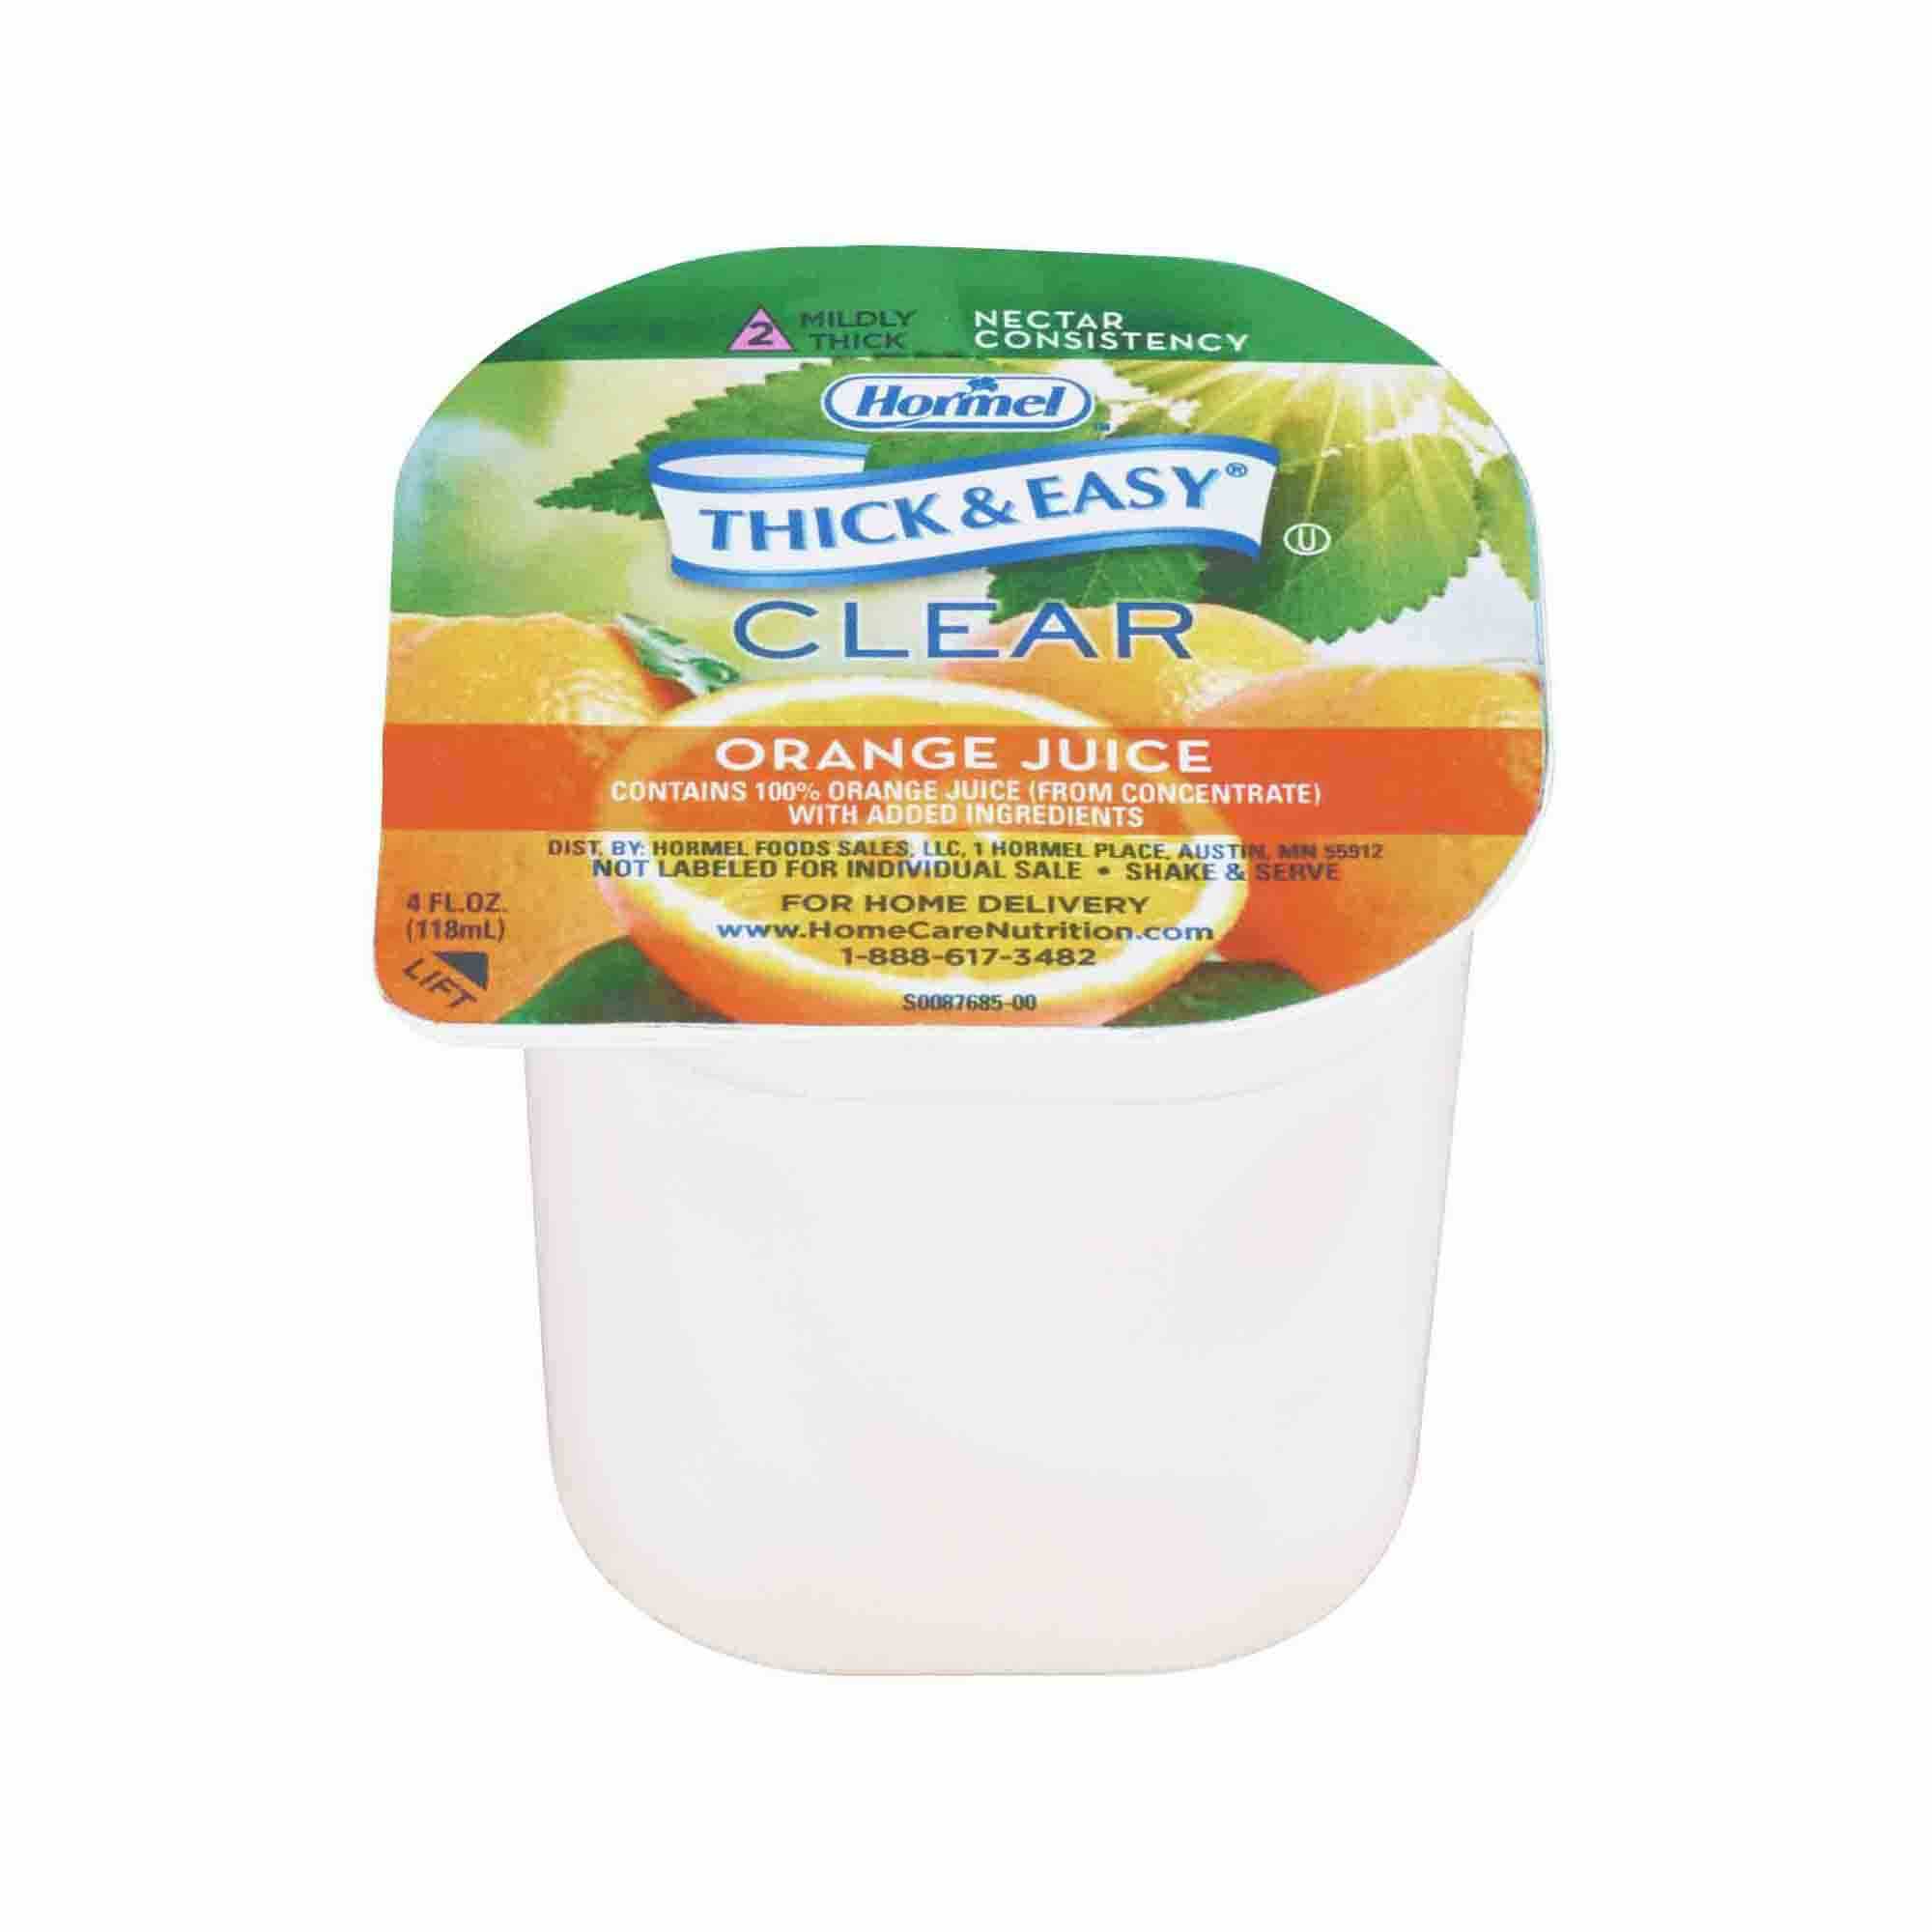 Thick & Easy Ready to Use Thickened Beverage, Orange Juice Flavor, 4 oz., Portion Cup, 49144, Case of 24 Cups